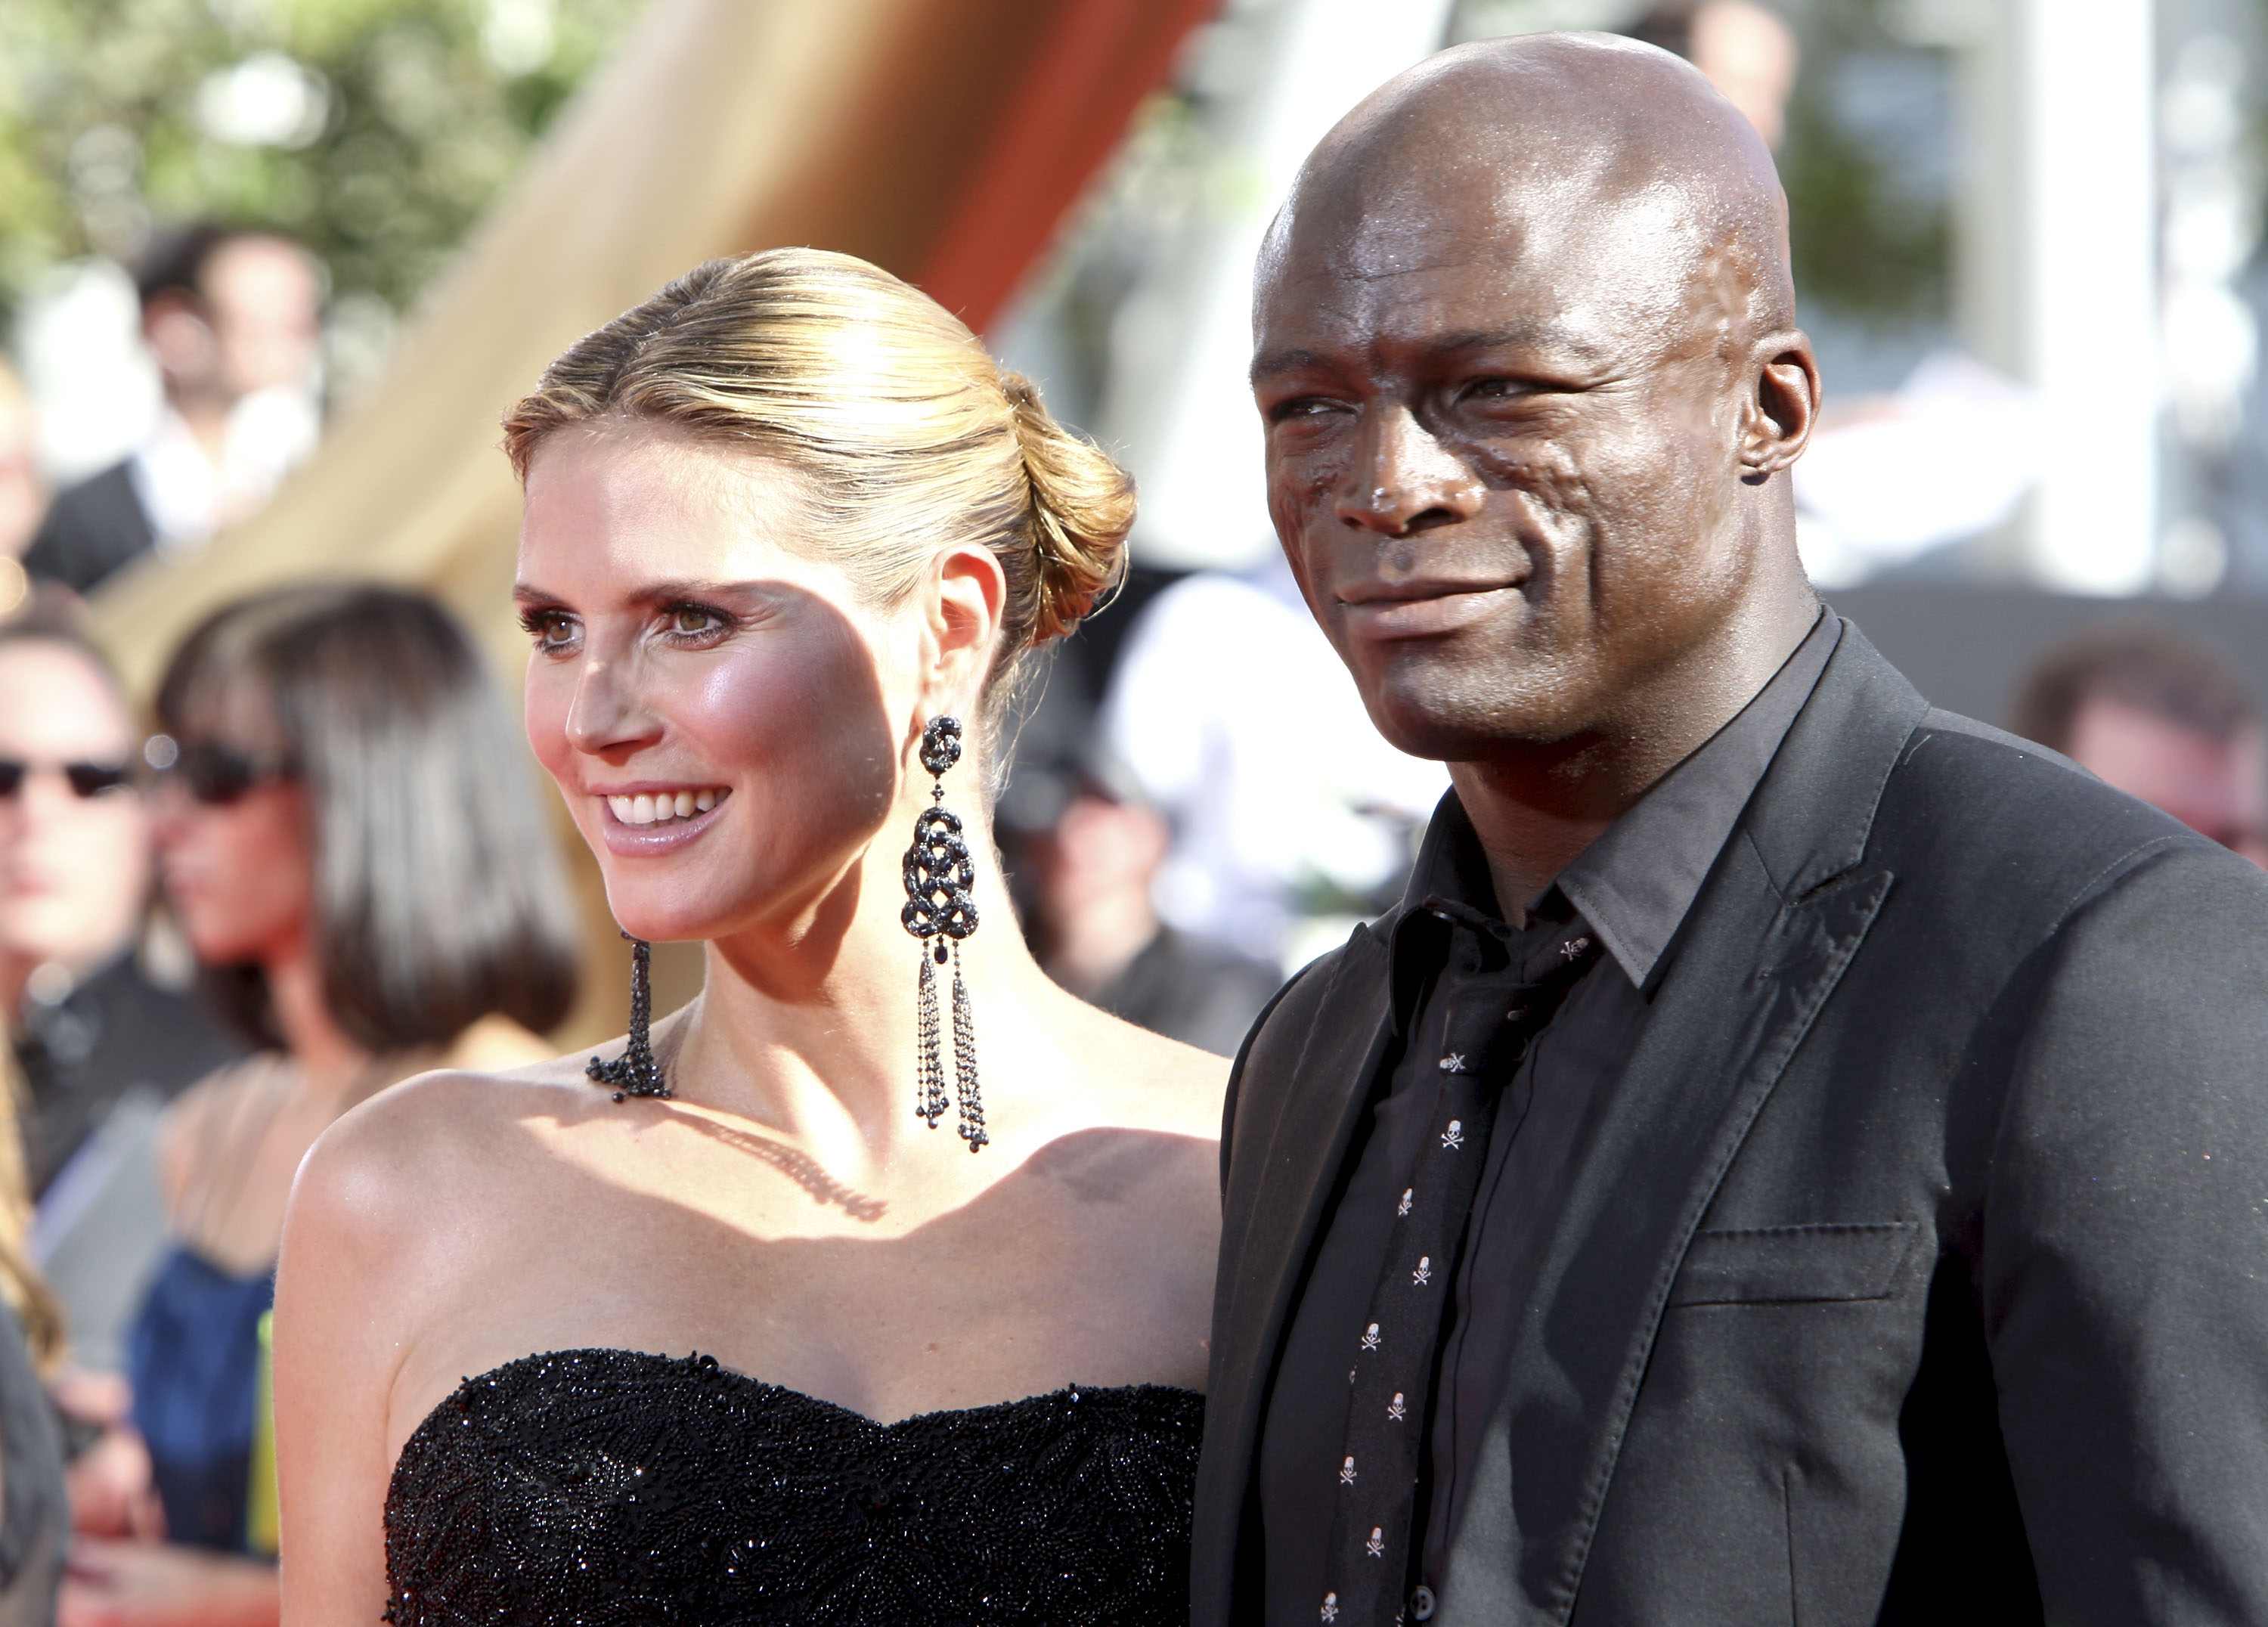 Heidi Klum and Seal at the 61st Primetime Emmy Awards on September 20, 2009, less than a month before their daughter was born, in Los Angeles, California. | Source: Getty Images